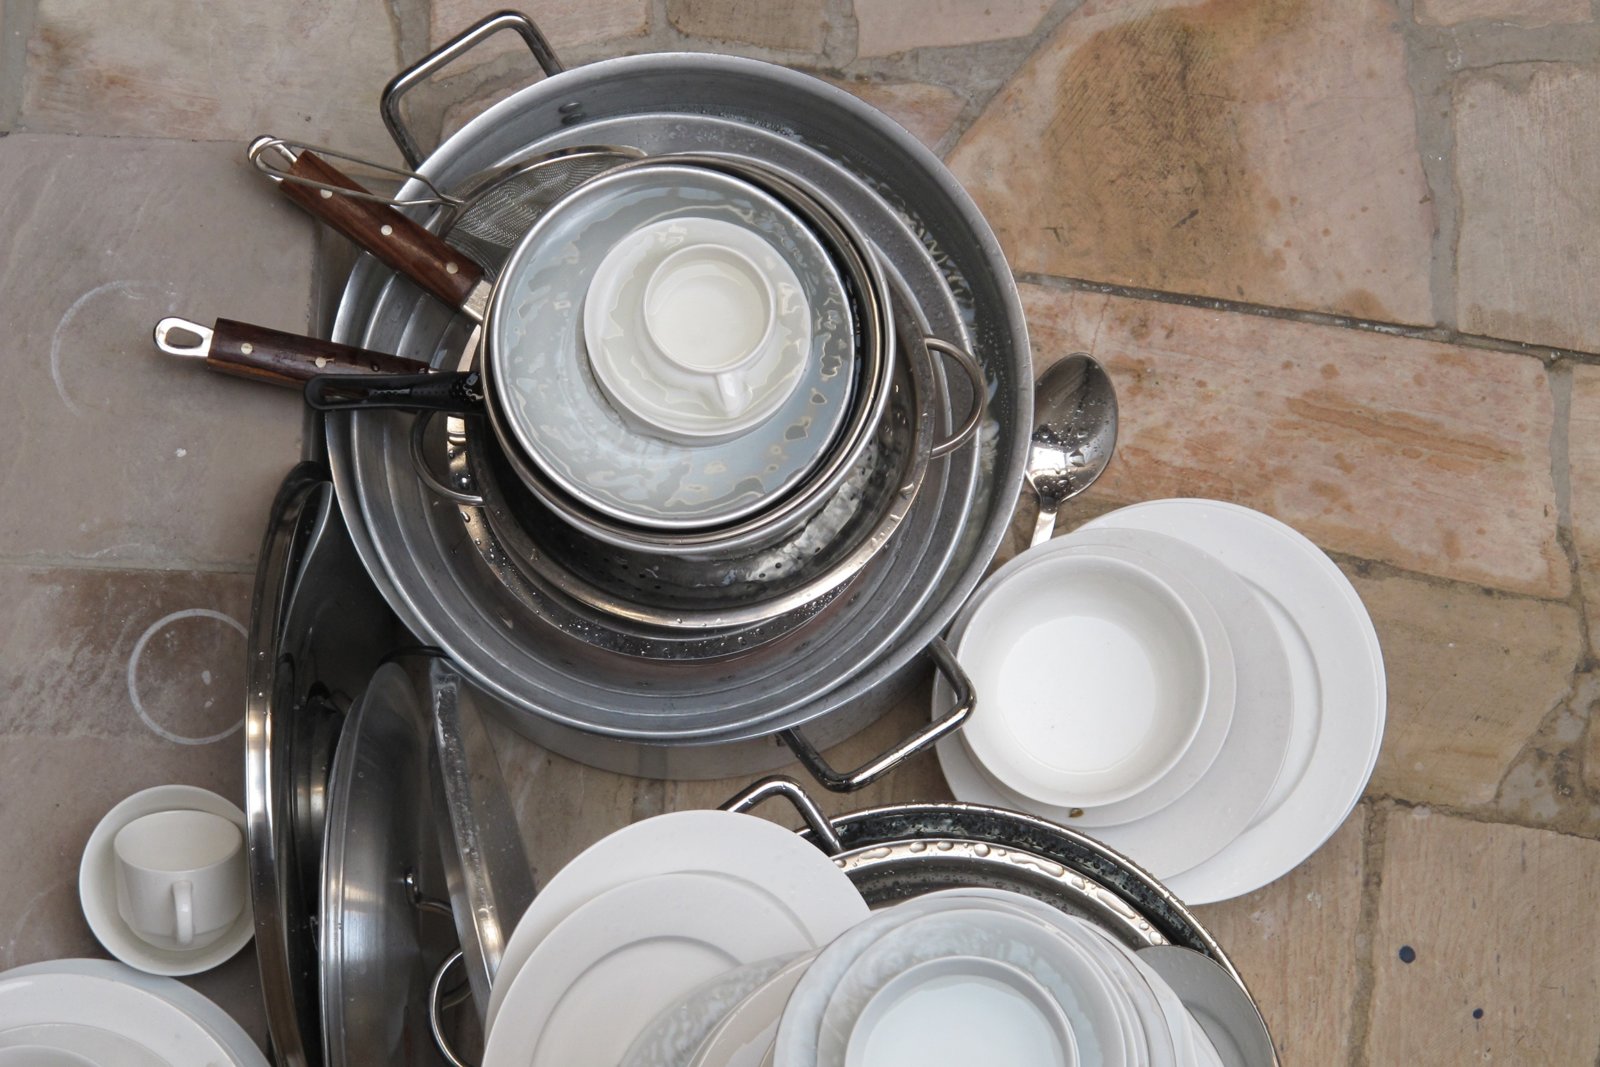 Abbas Akhavan, Variations on Ghosts and Guests: Well, 2011, various dishes, cookware, internal fountain system, water, dimensions variable. Installation view, Variations on Ghosts and Guests, Delfina Foundation, Dubai, UAE, 2011